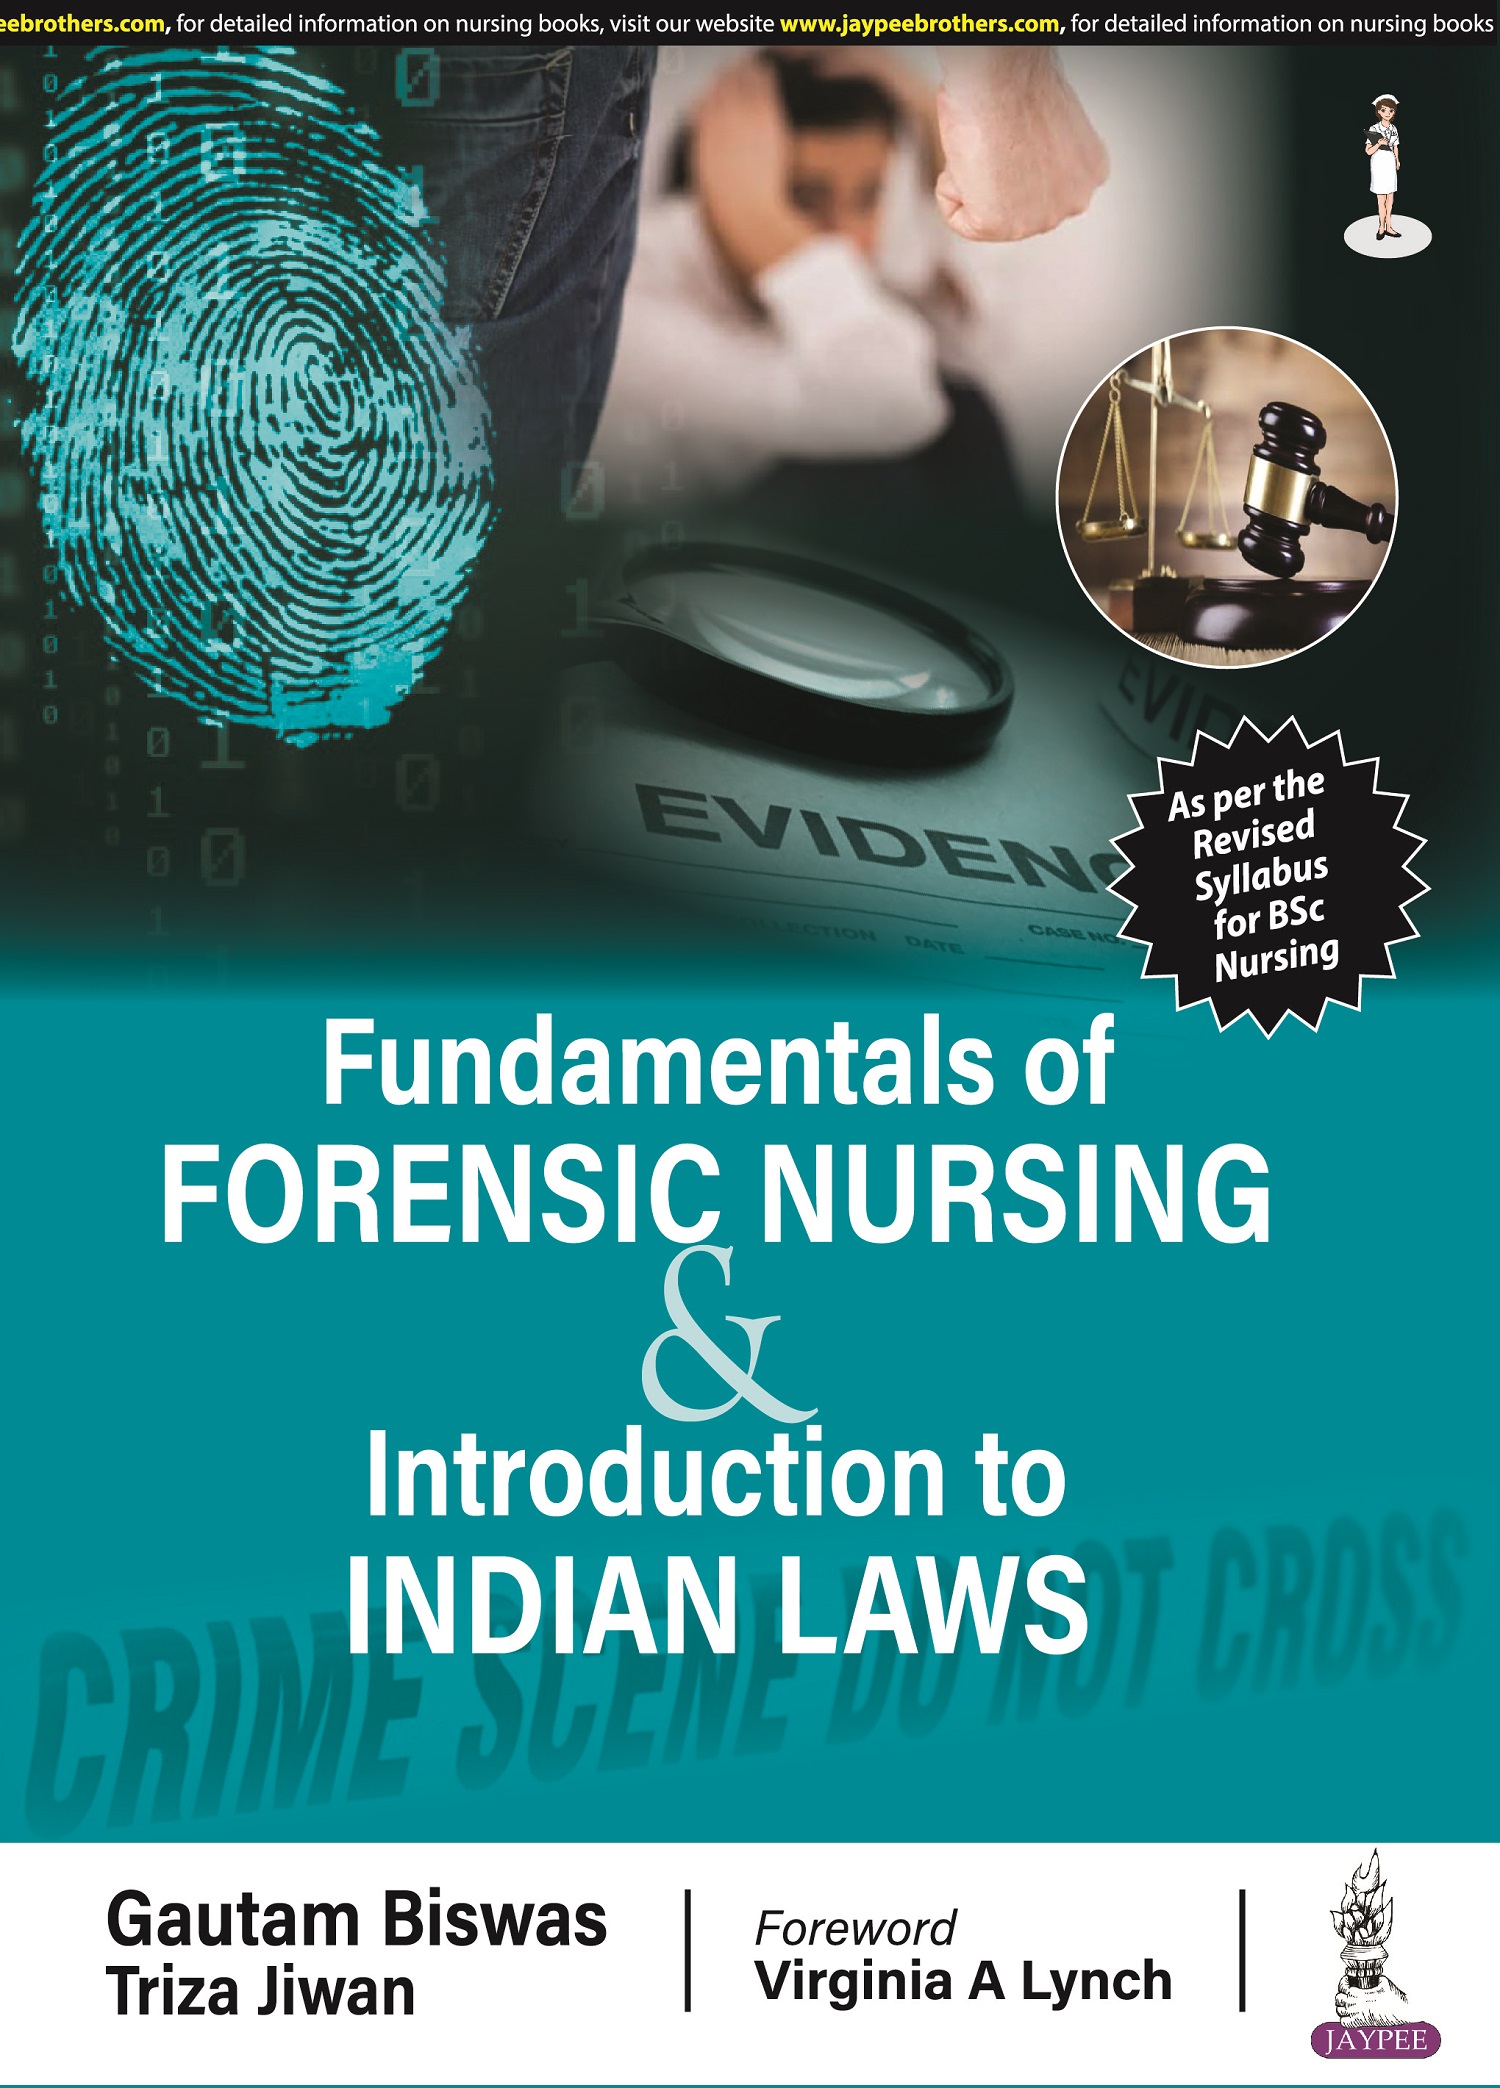 Fundamentals of Forensic Nursing & Introduction to Laws